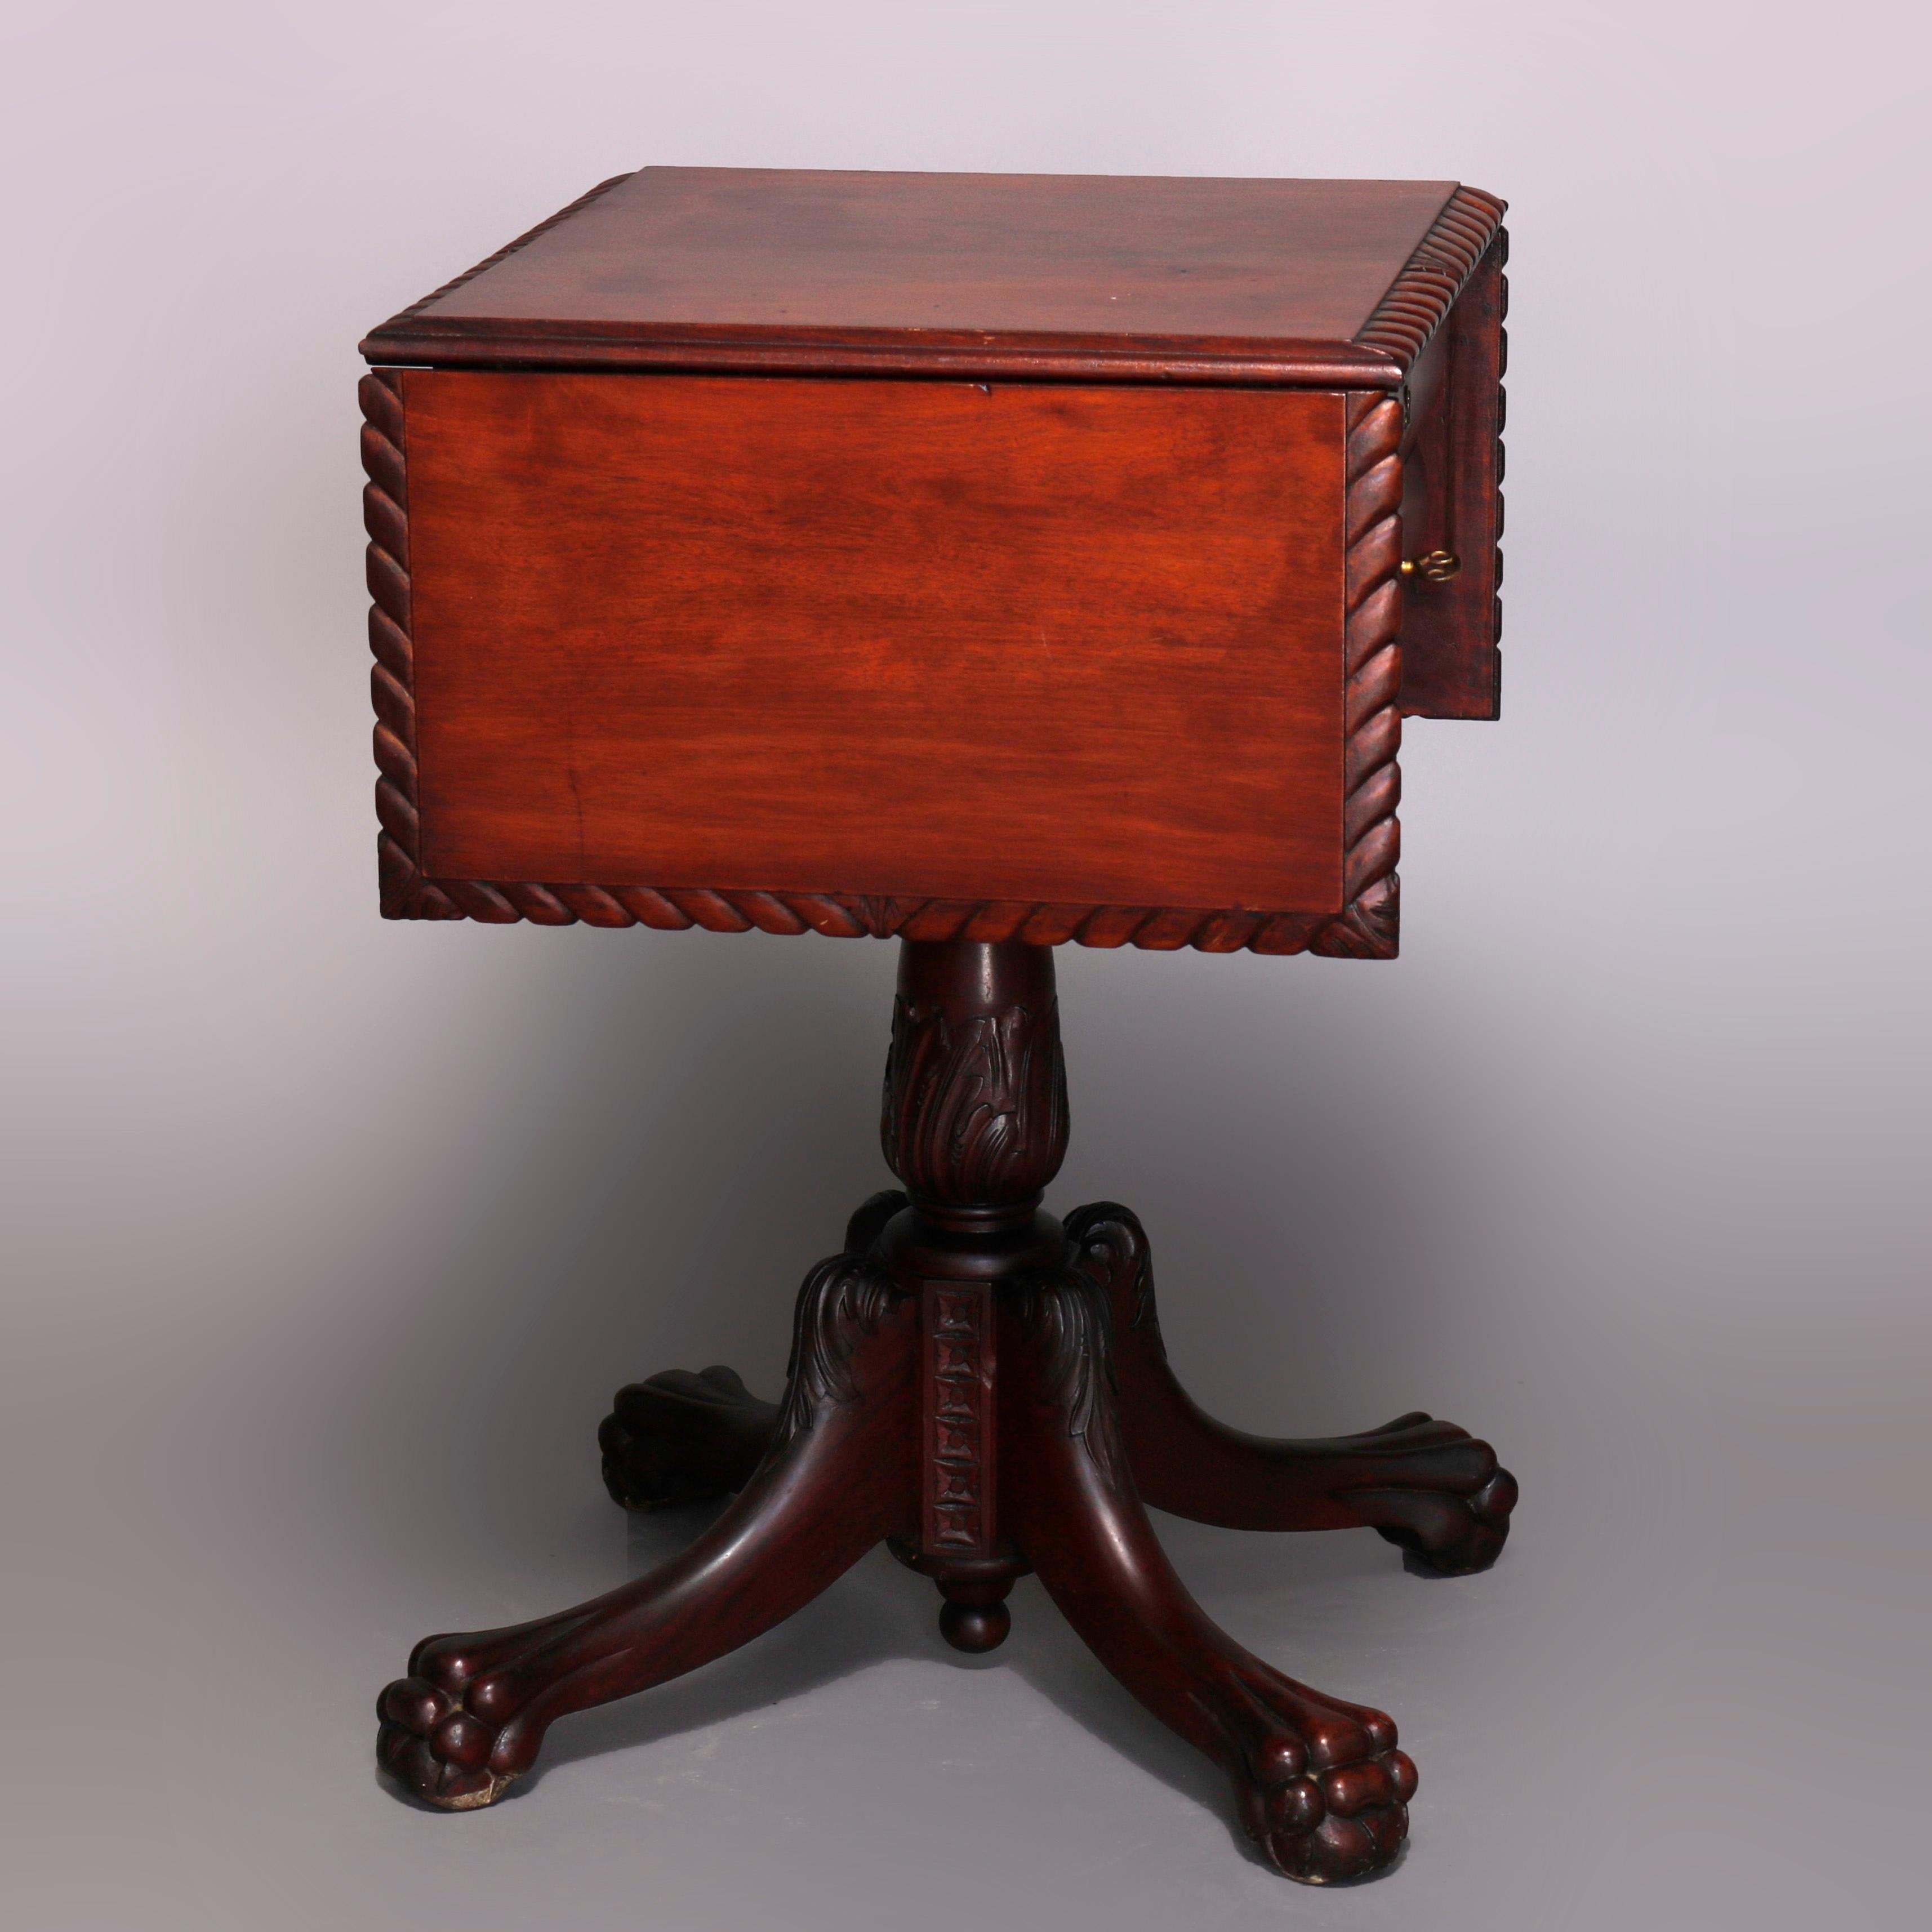 Antique Classical American Empire Flame Mahogany Drop Leaf Stand, 19th Century 2